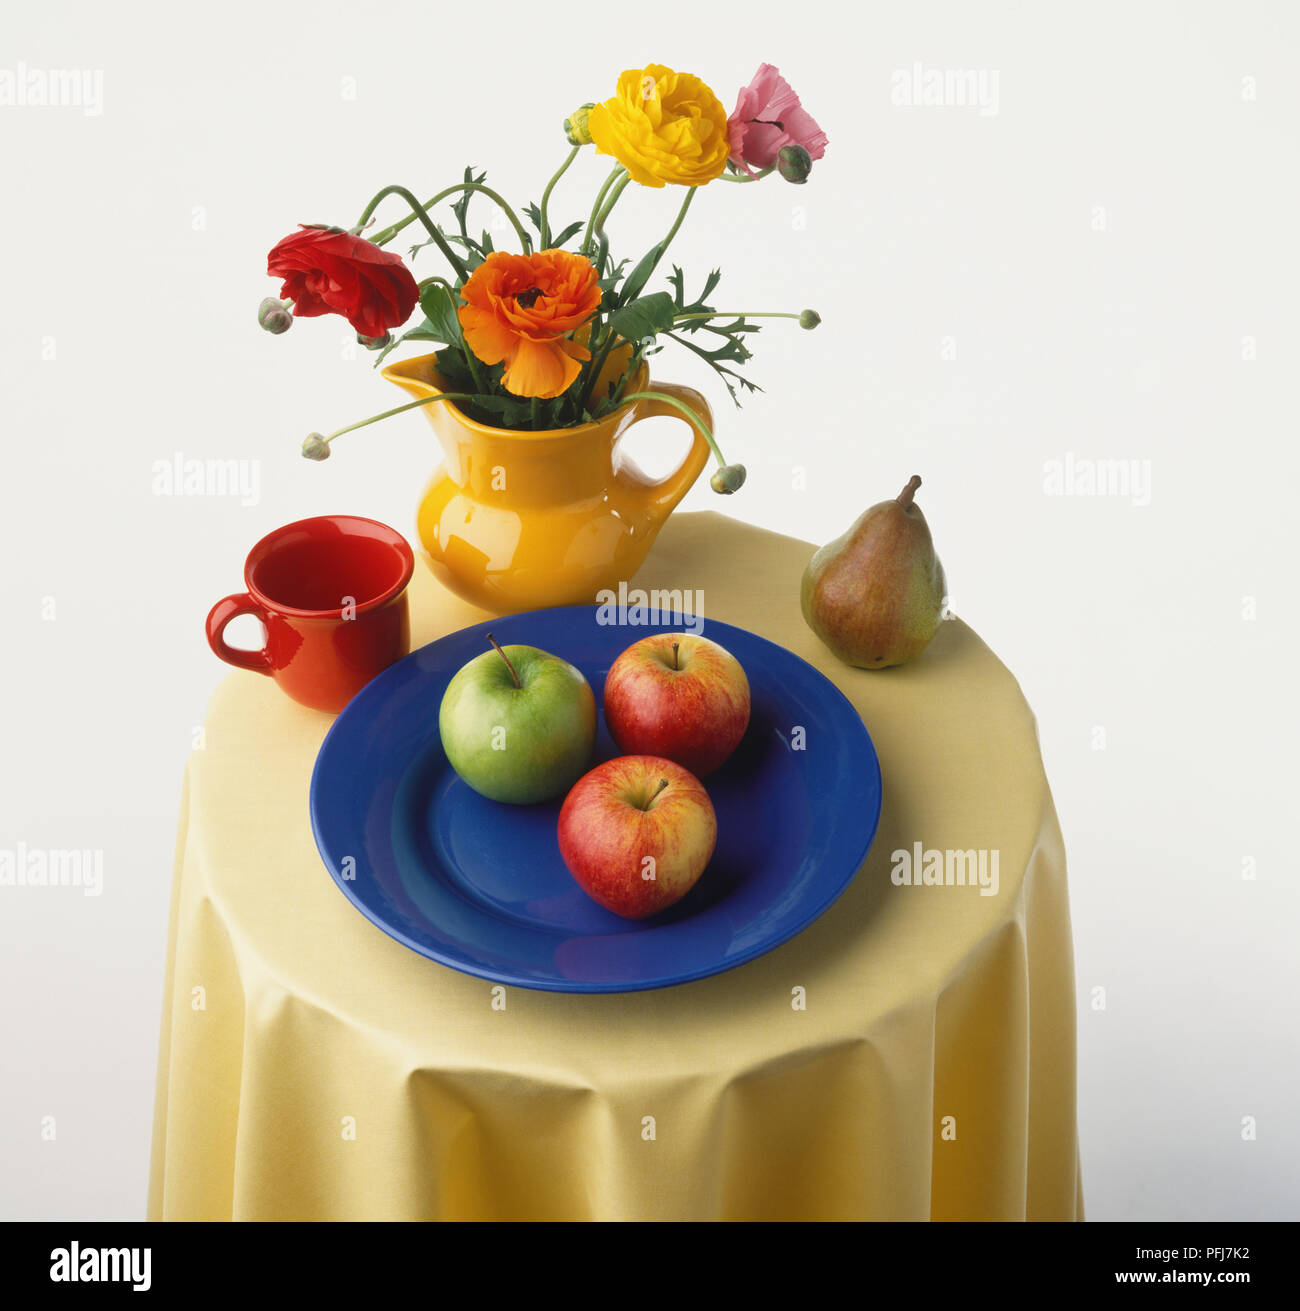 Small round table laid with red mug, colourful flowers in yellow jug, three apples on blue plate, pear,  elevated view. Stock Photo